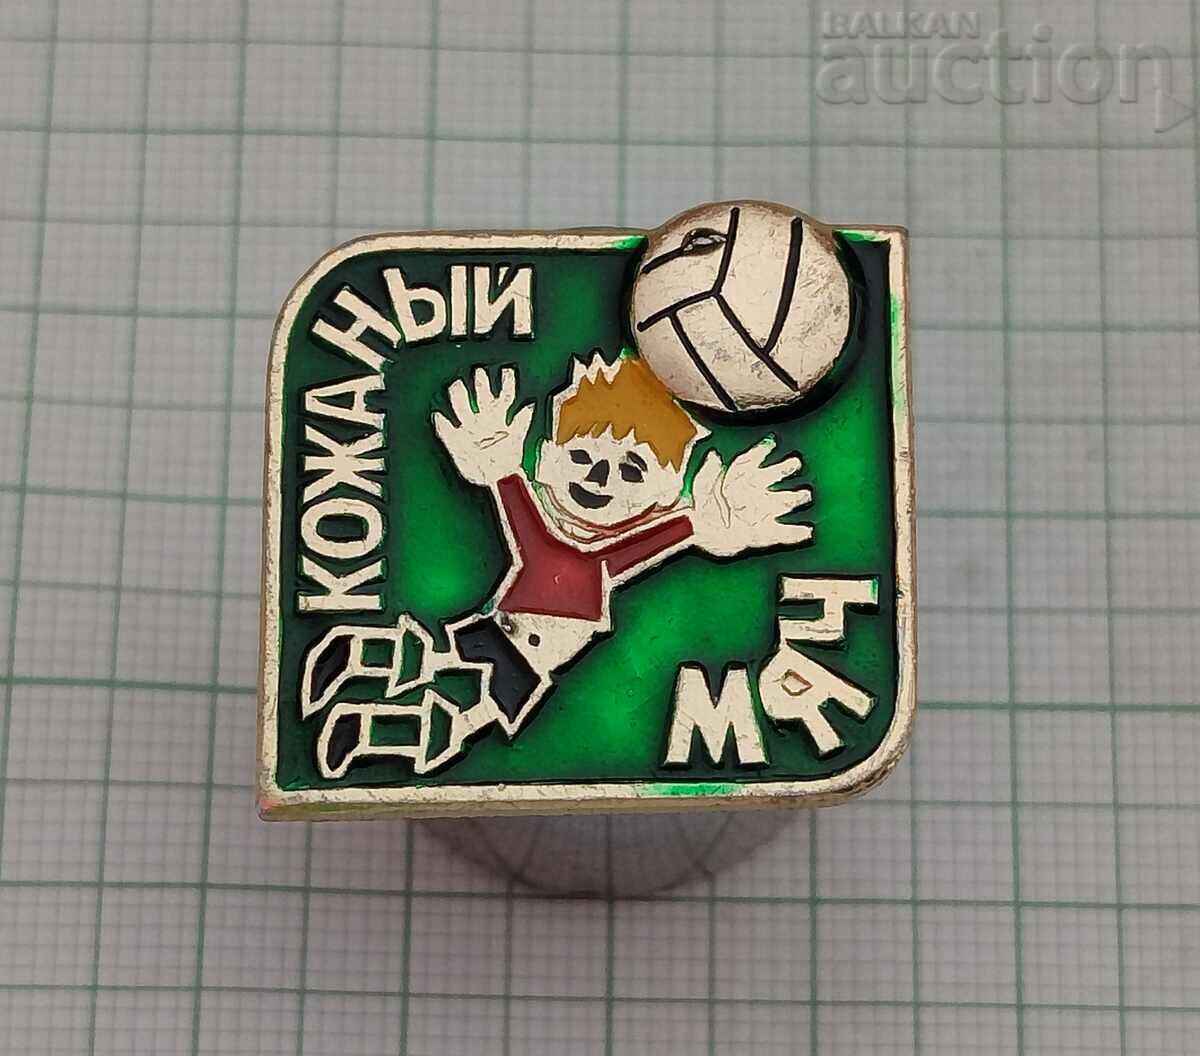 SOCCER YOUTH TOURNAMENT USSR BADGE